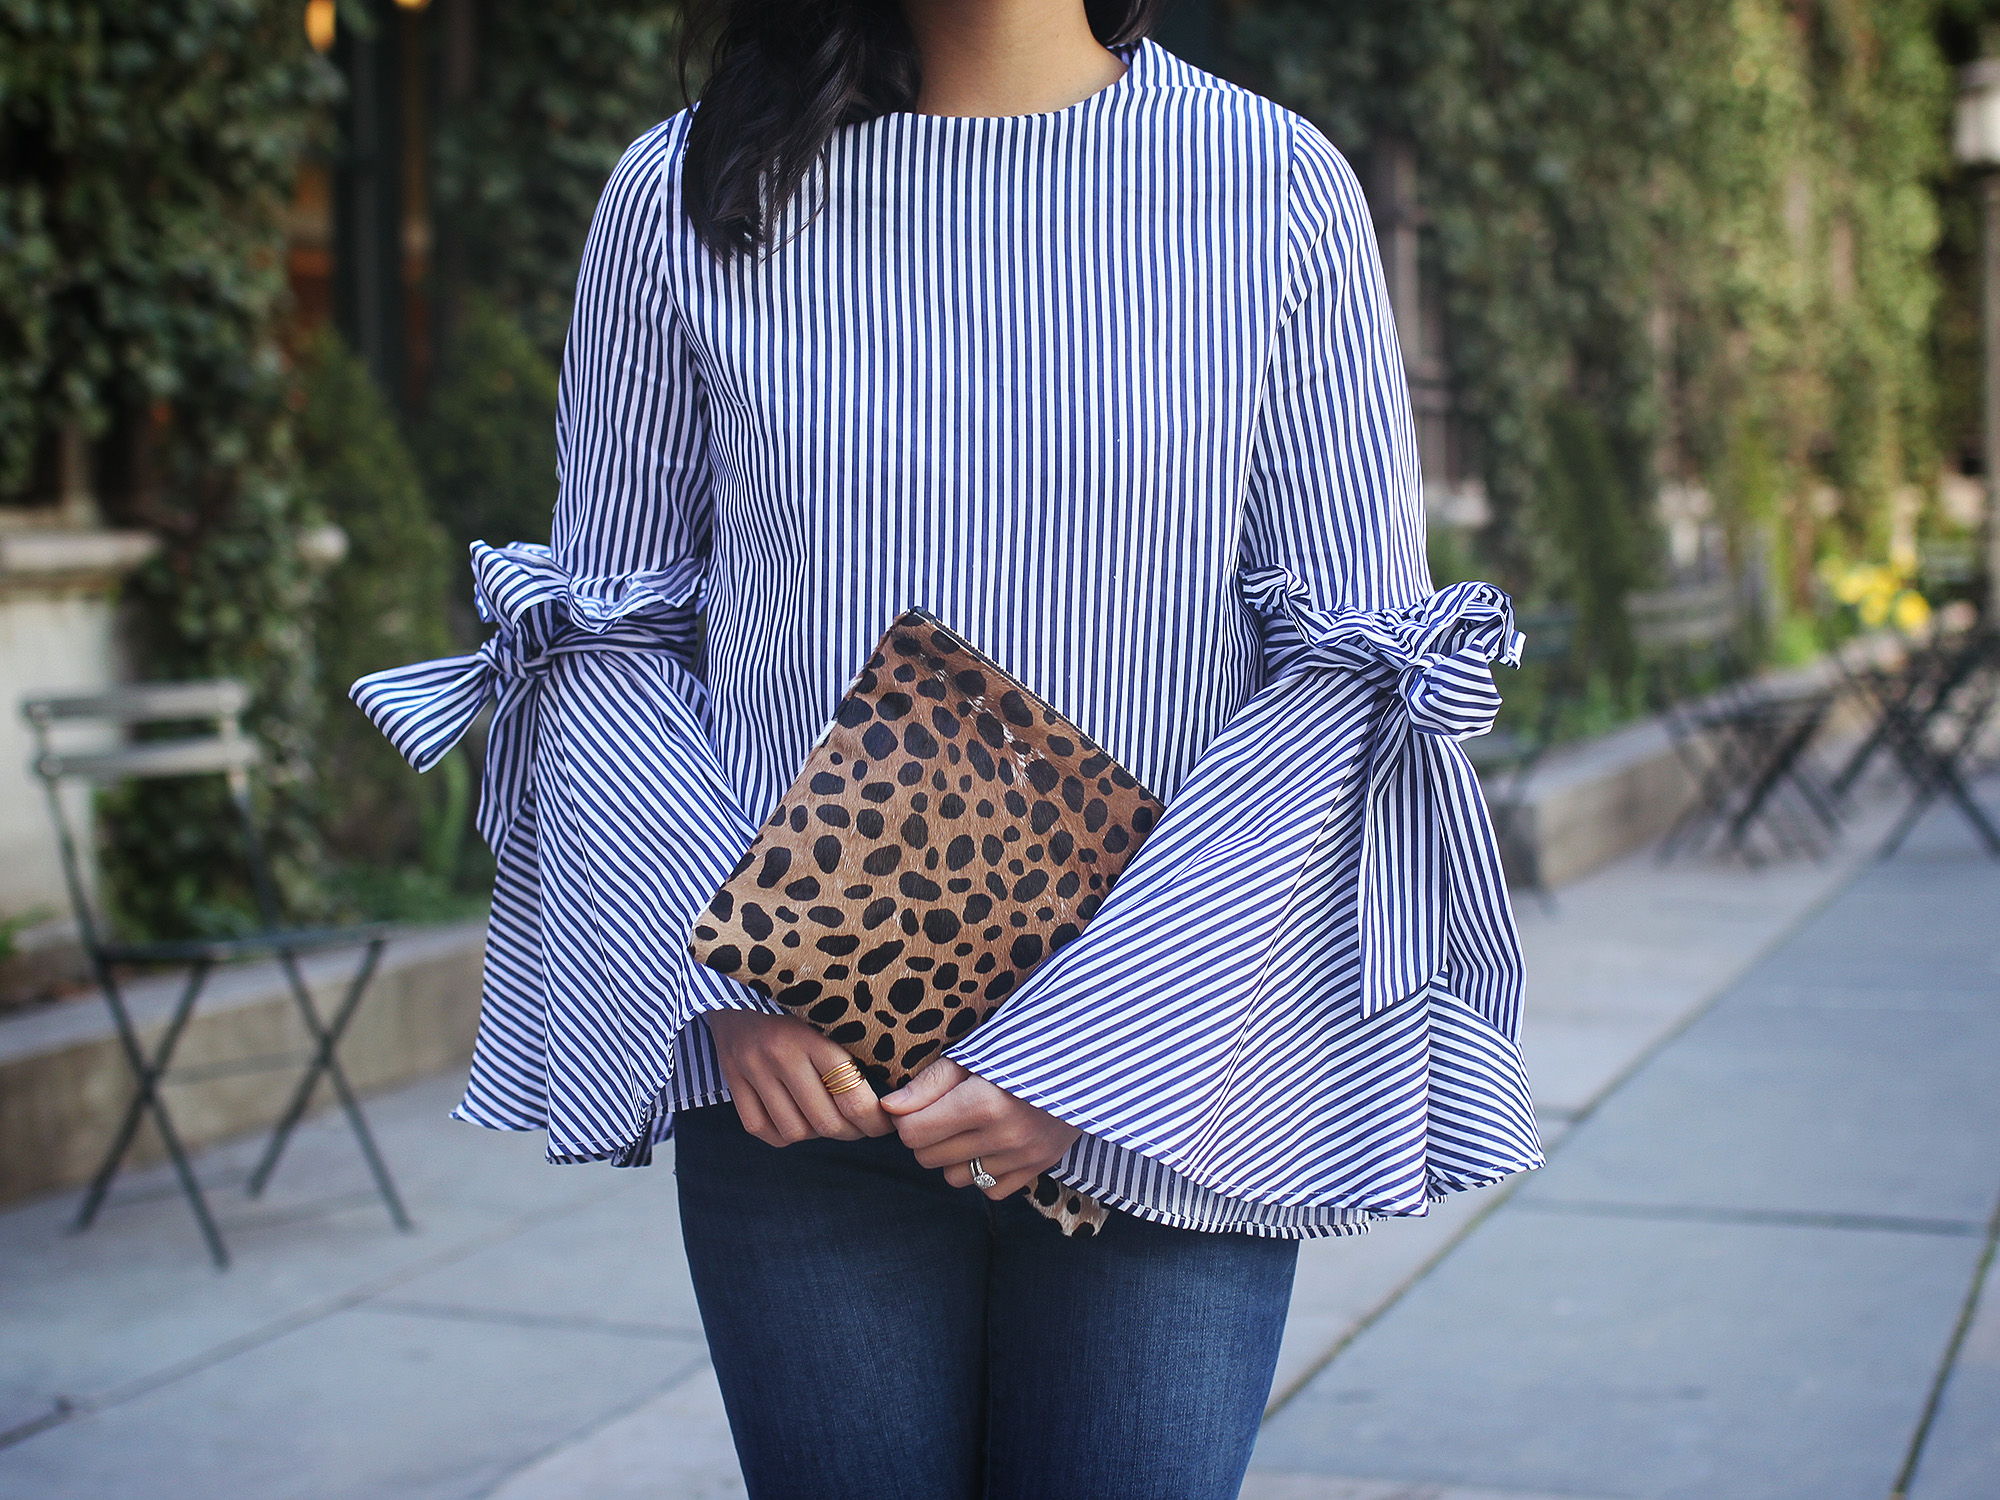 Skirt The Rules / Blue & White Striped Bell Sleeve Top